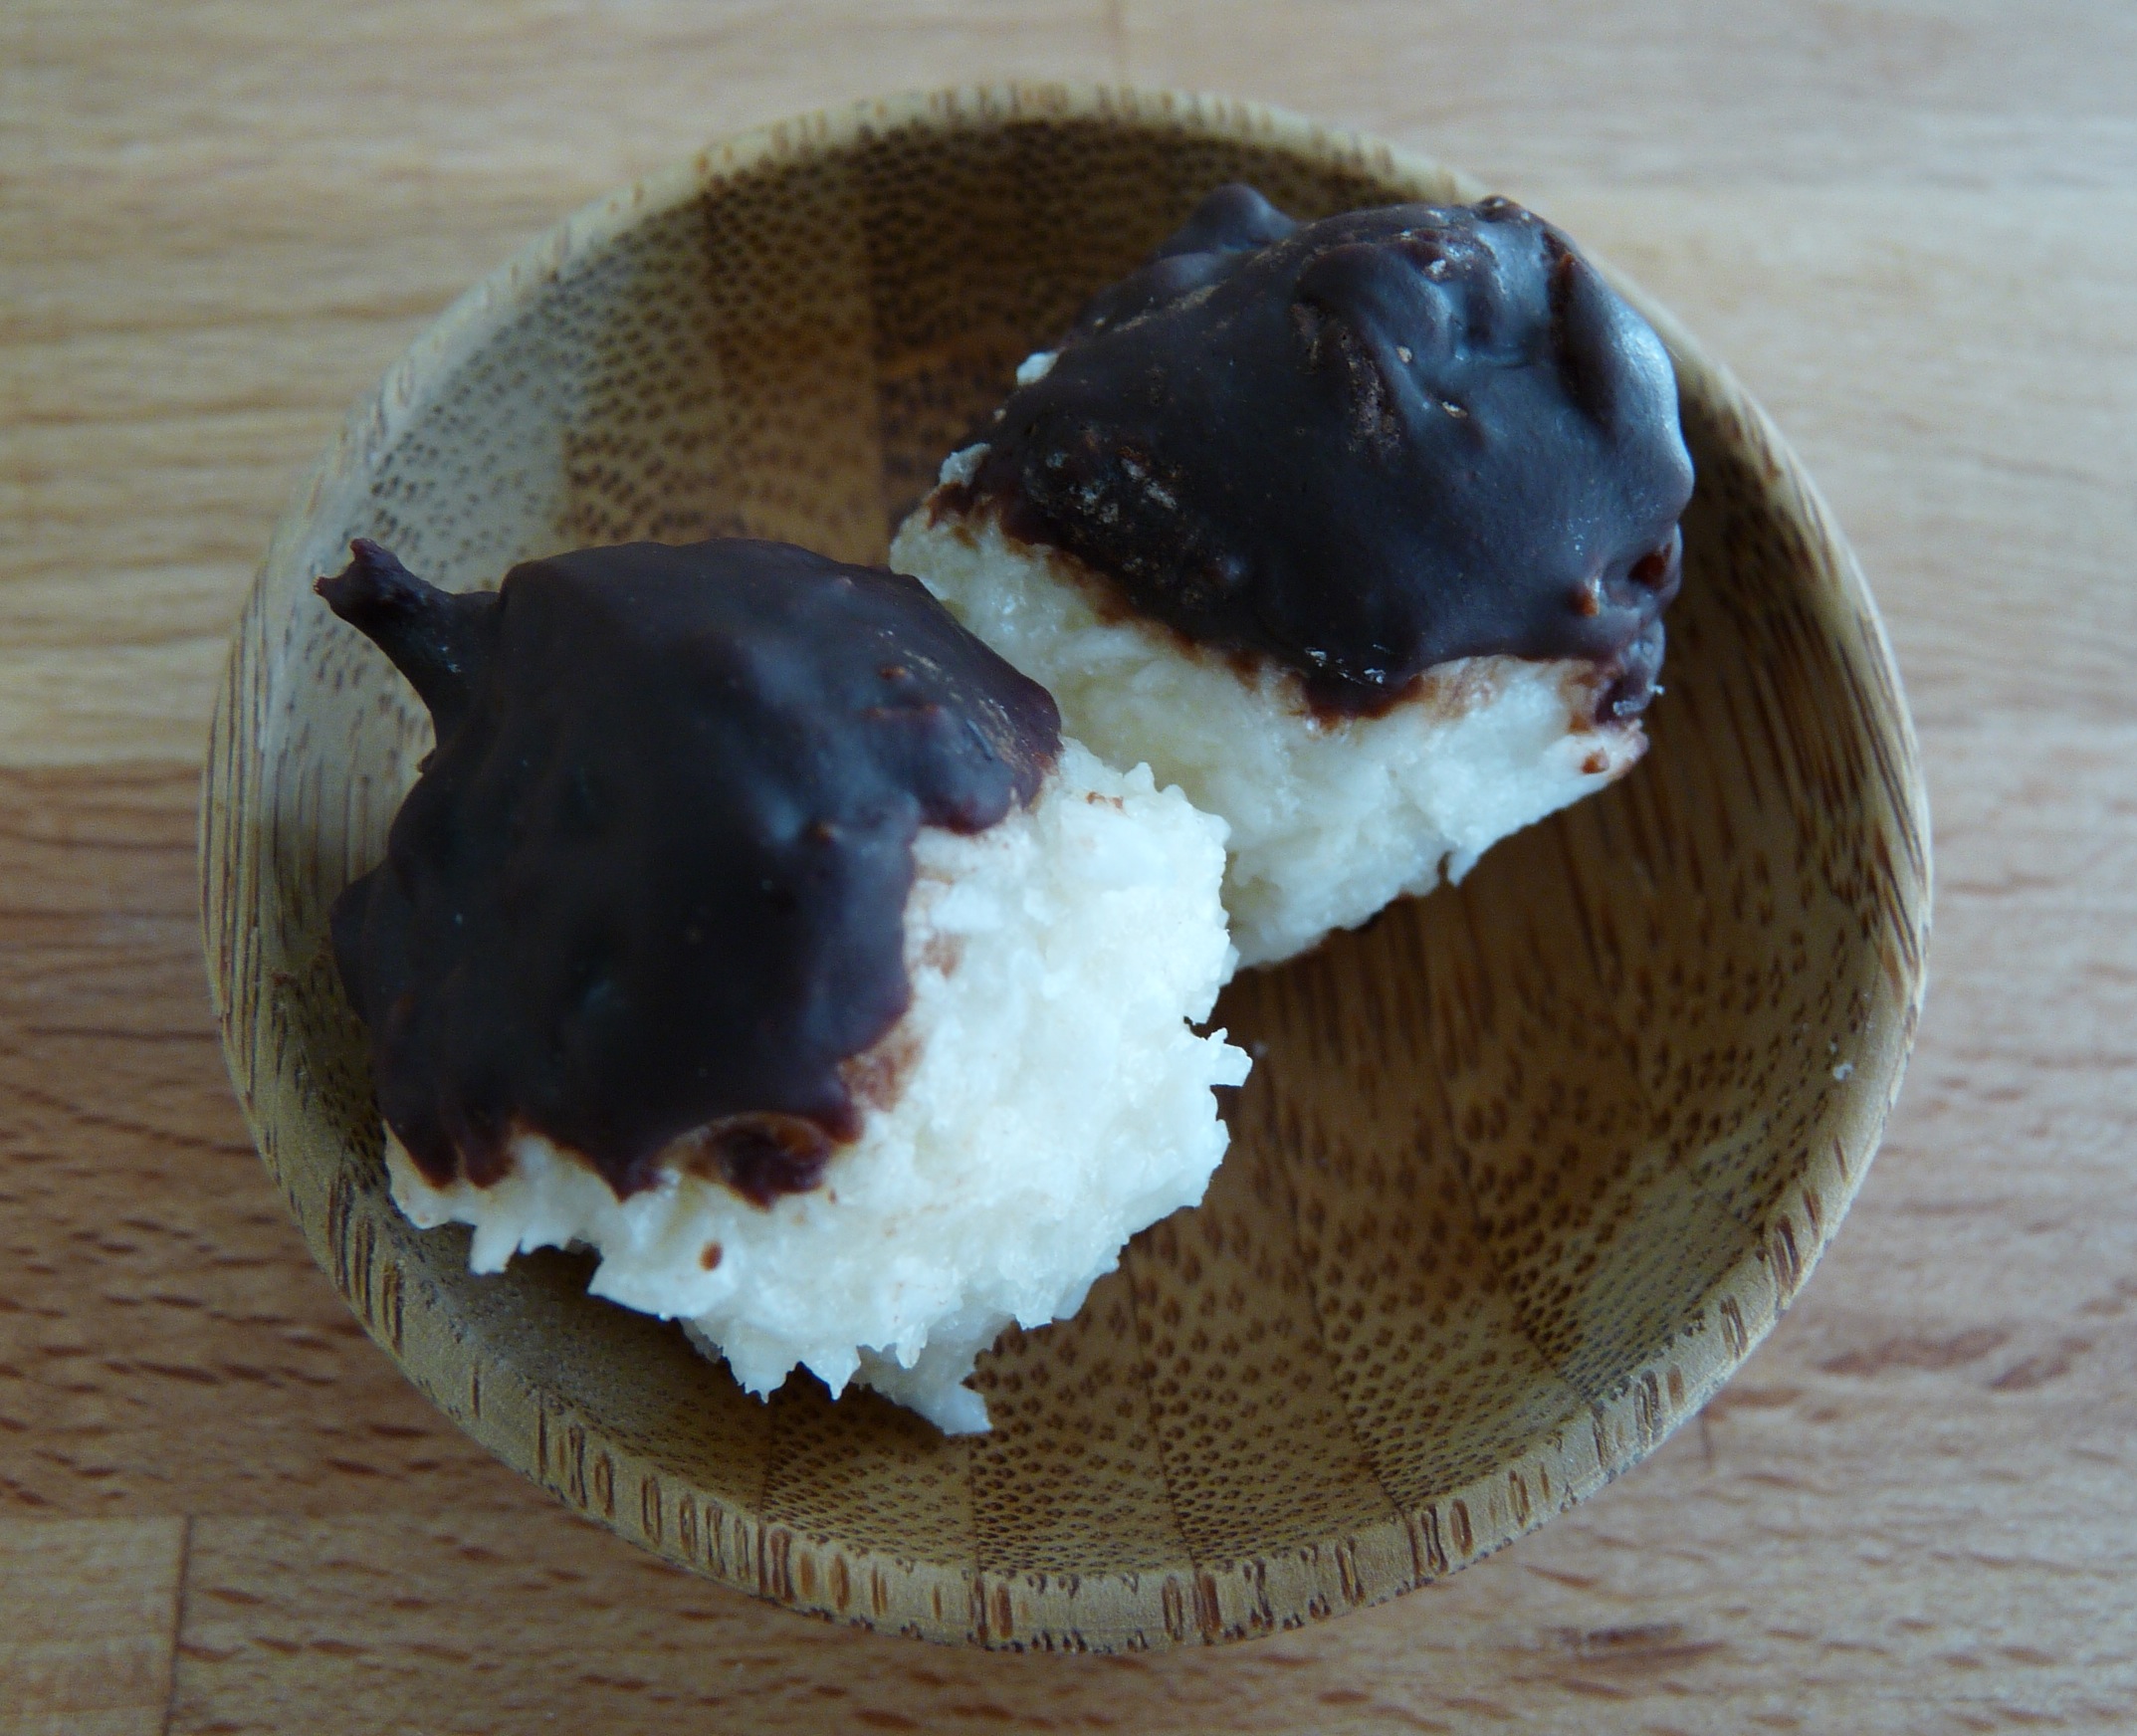 coconut candy